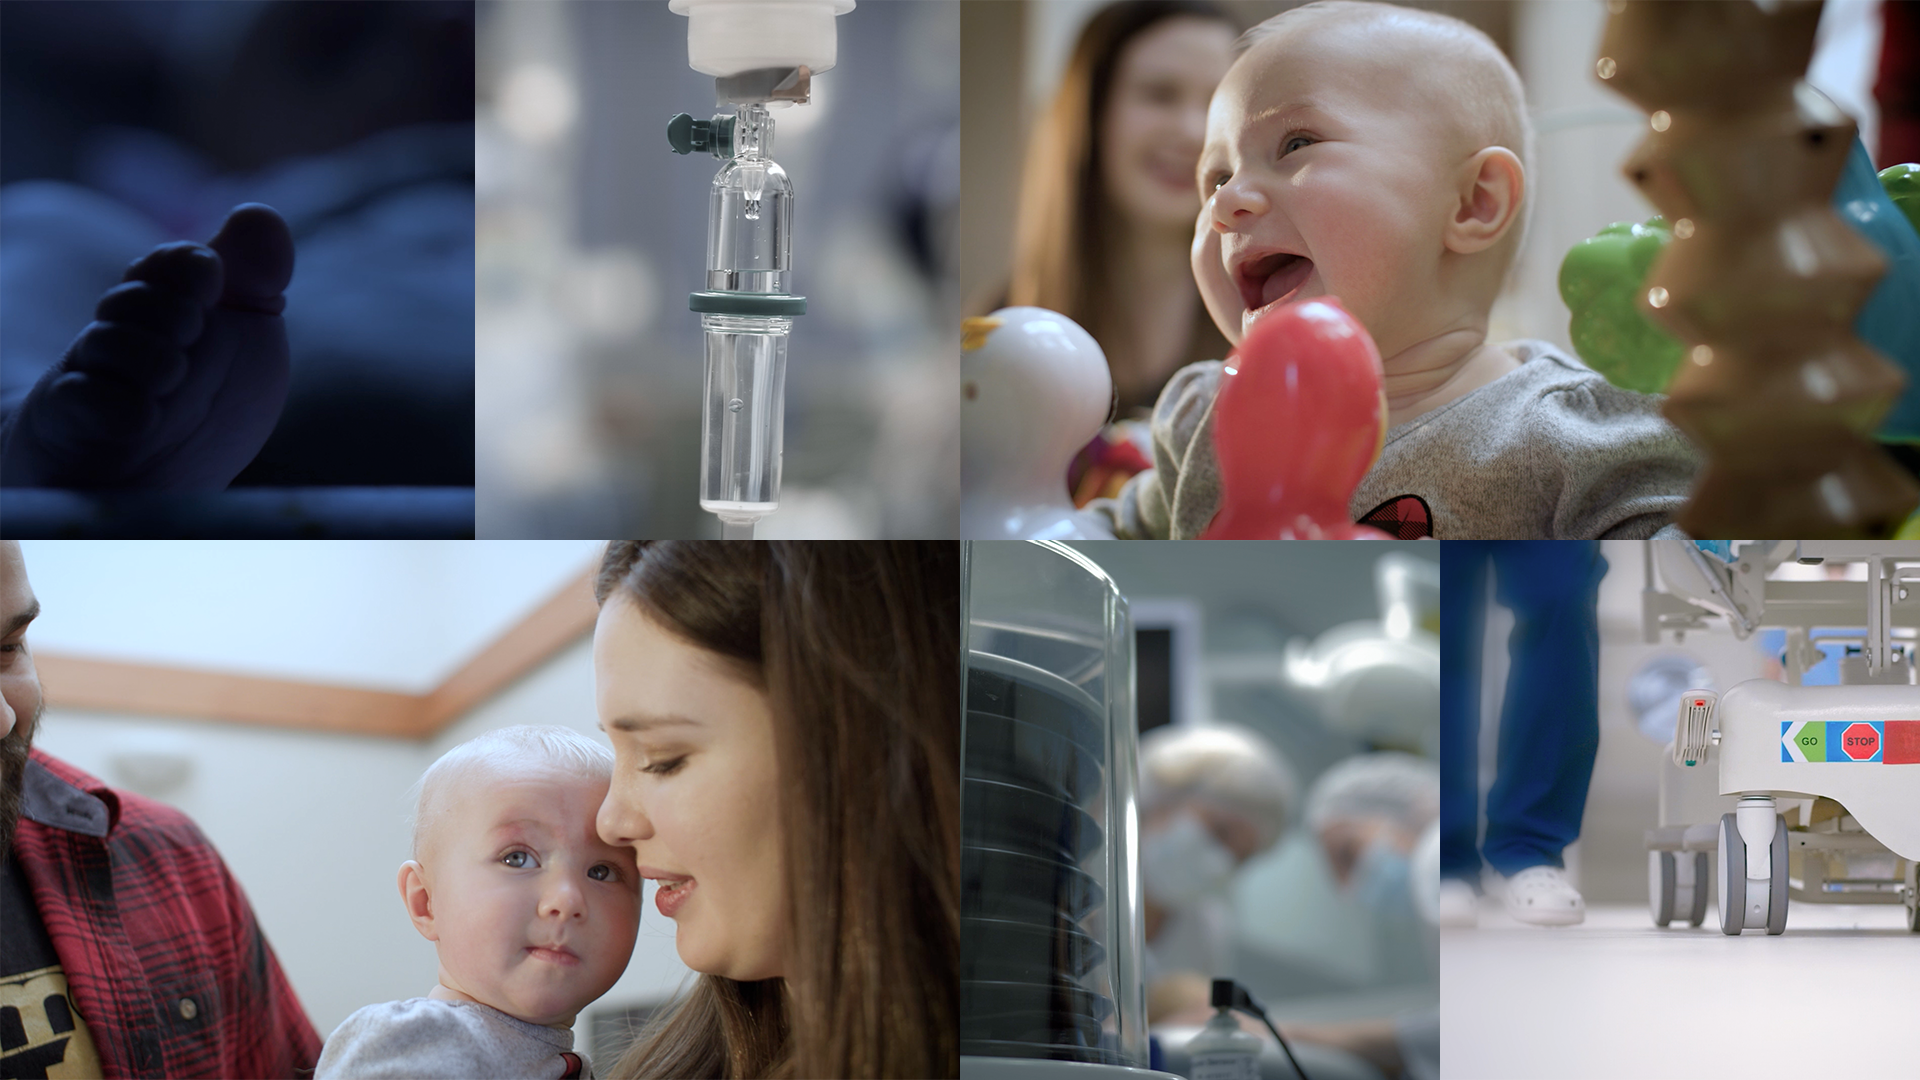 A collage of images, featuring the bottom of a hospital gurney, a baby held by her mom, a smiling baby, a IV drip, and a dark shot of a baby's foot in a CT scan.